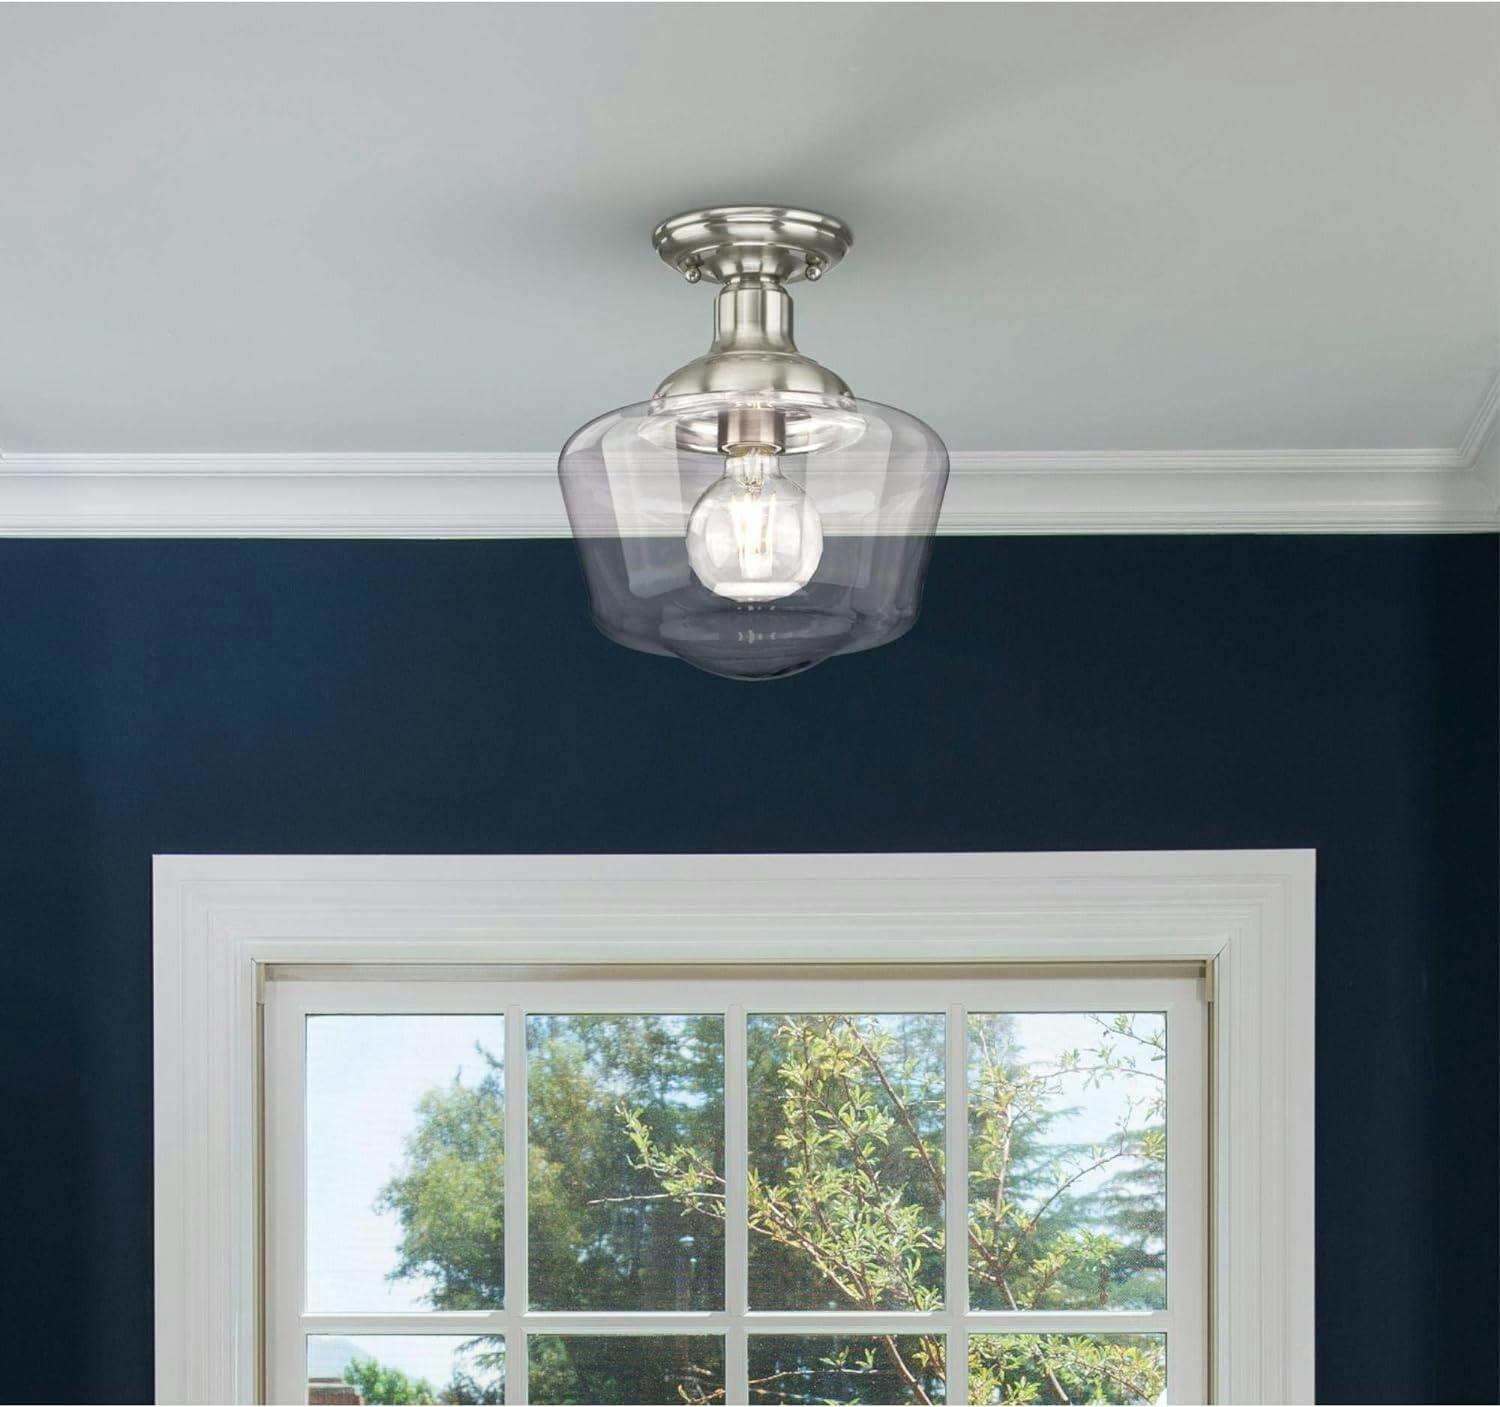 Scholar Brushed Nickel 9" Semi-Flush Mount Ceiling Light with Clear Glass